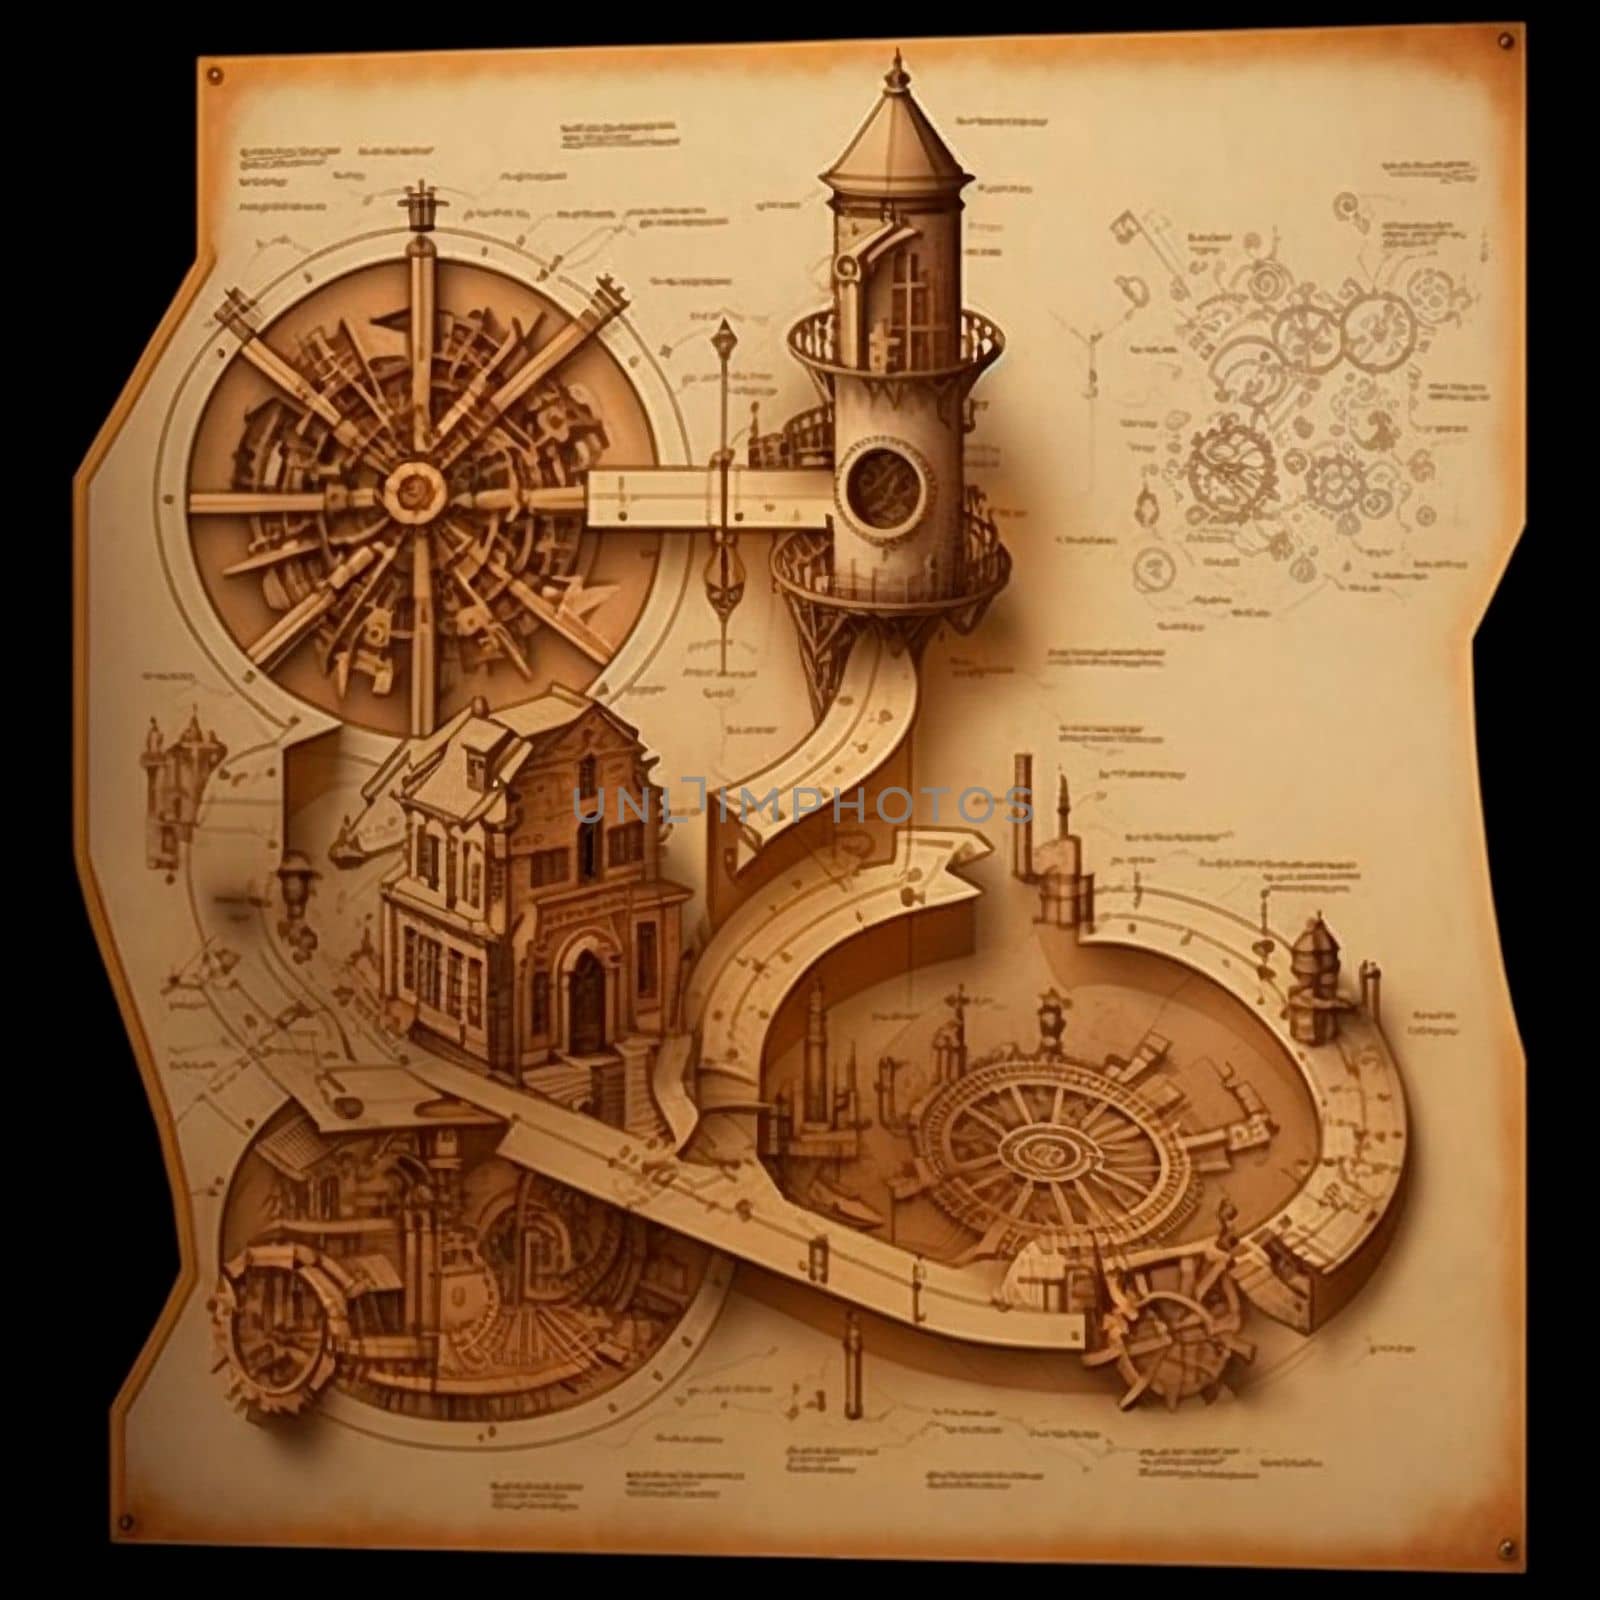 3d drawings of an unusual steampunk city, a city diagram. High quality illustration